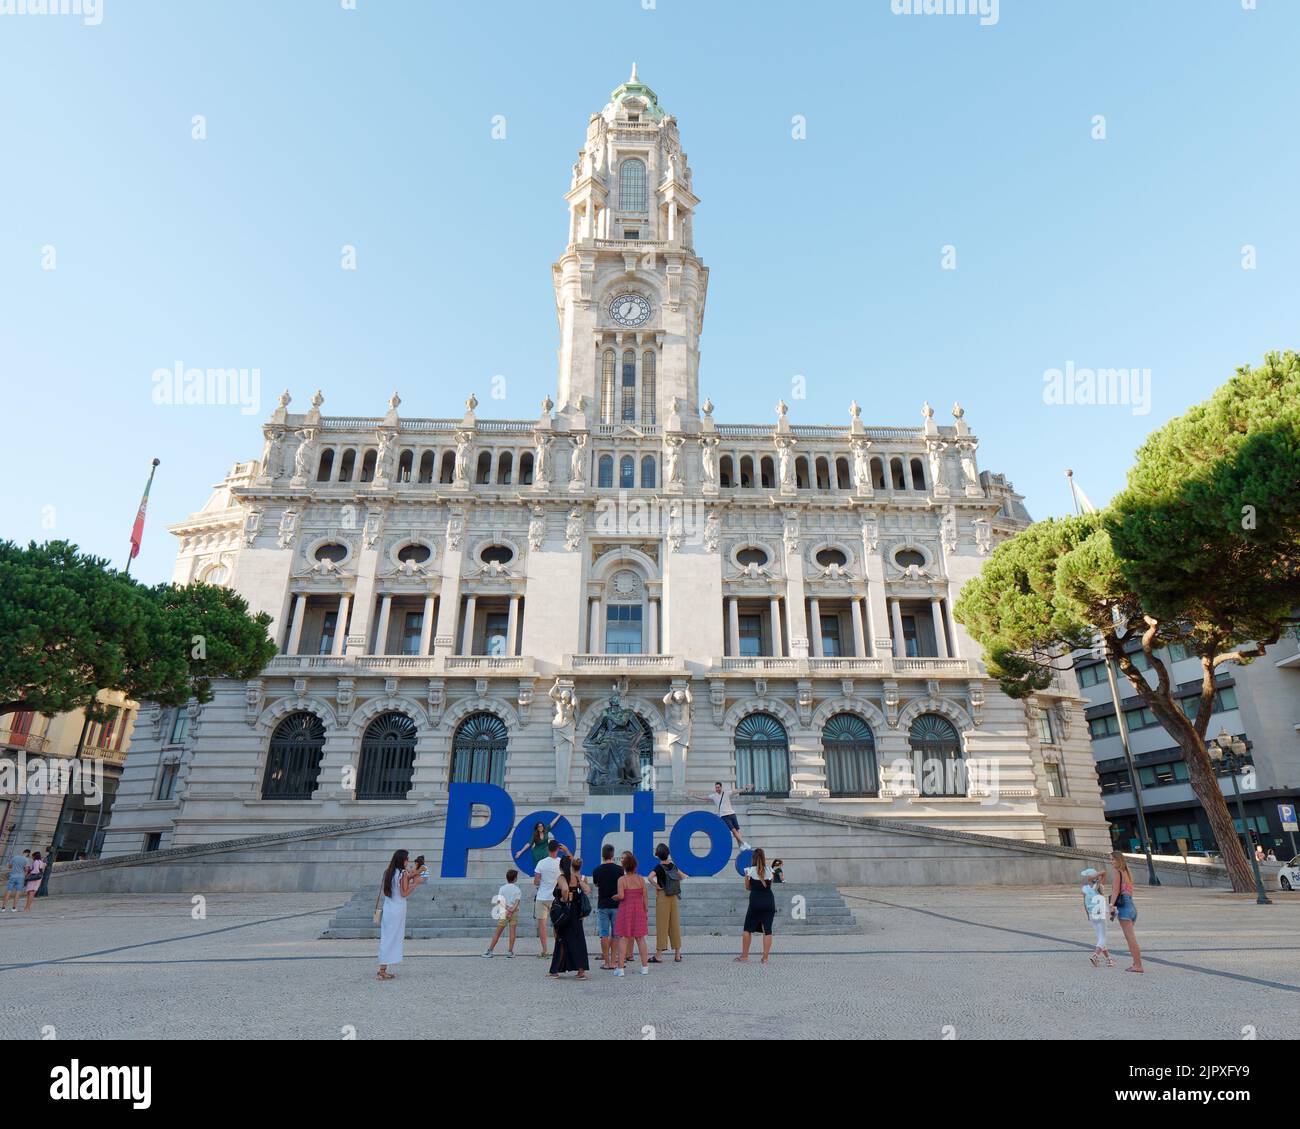 The Câmara Municipal (City hall) at the end of Avenida dos Aliados (Avenue of the Allies). Tourists take photos in front of the large blue Porto sign. Stock Photo